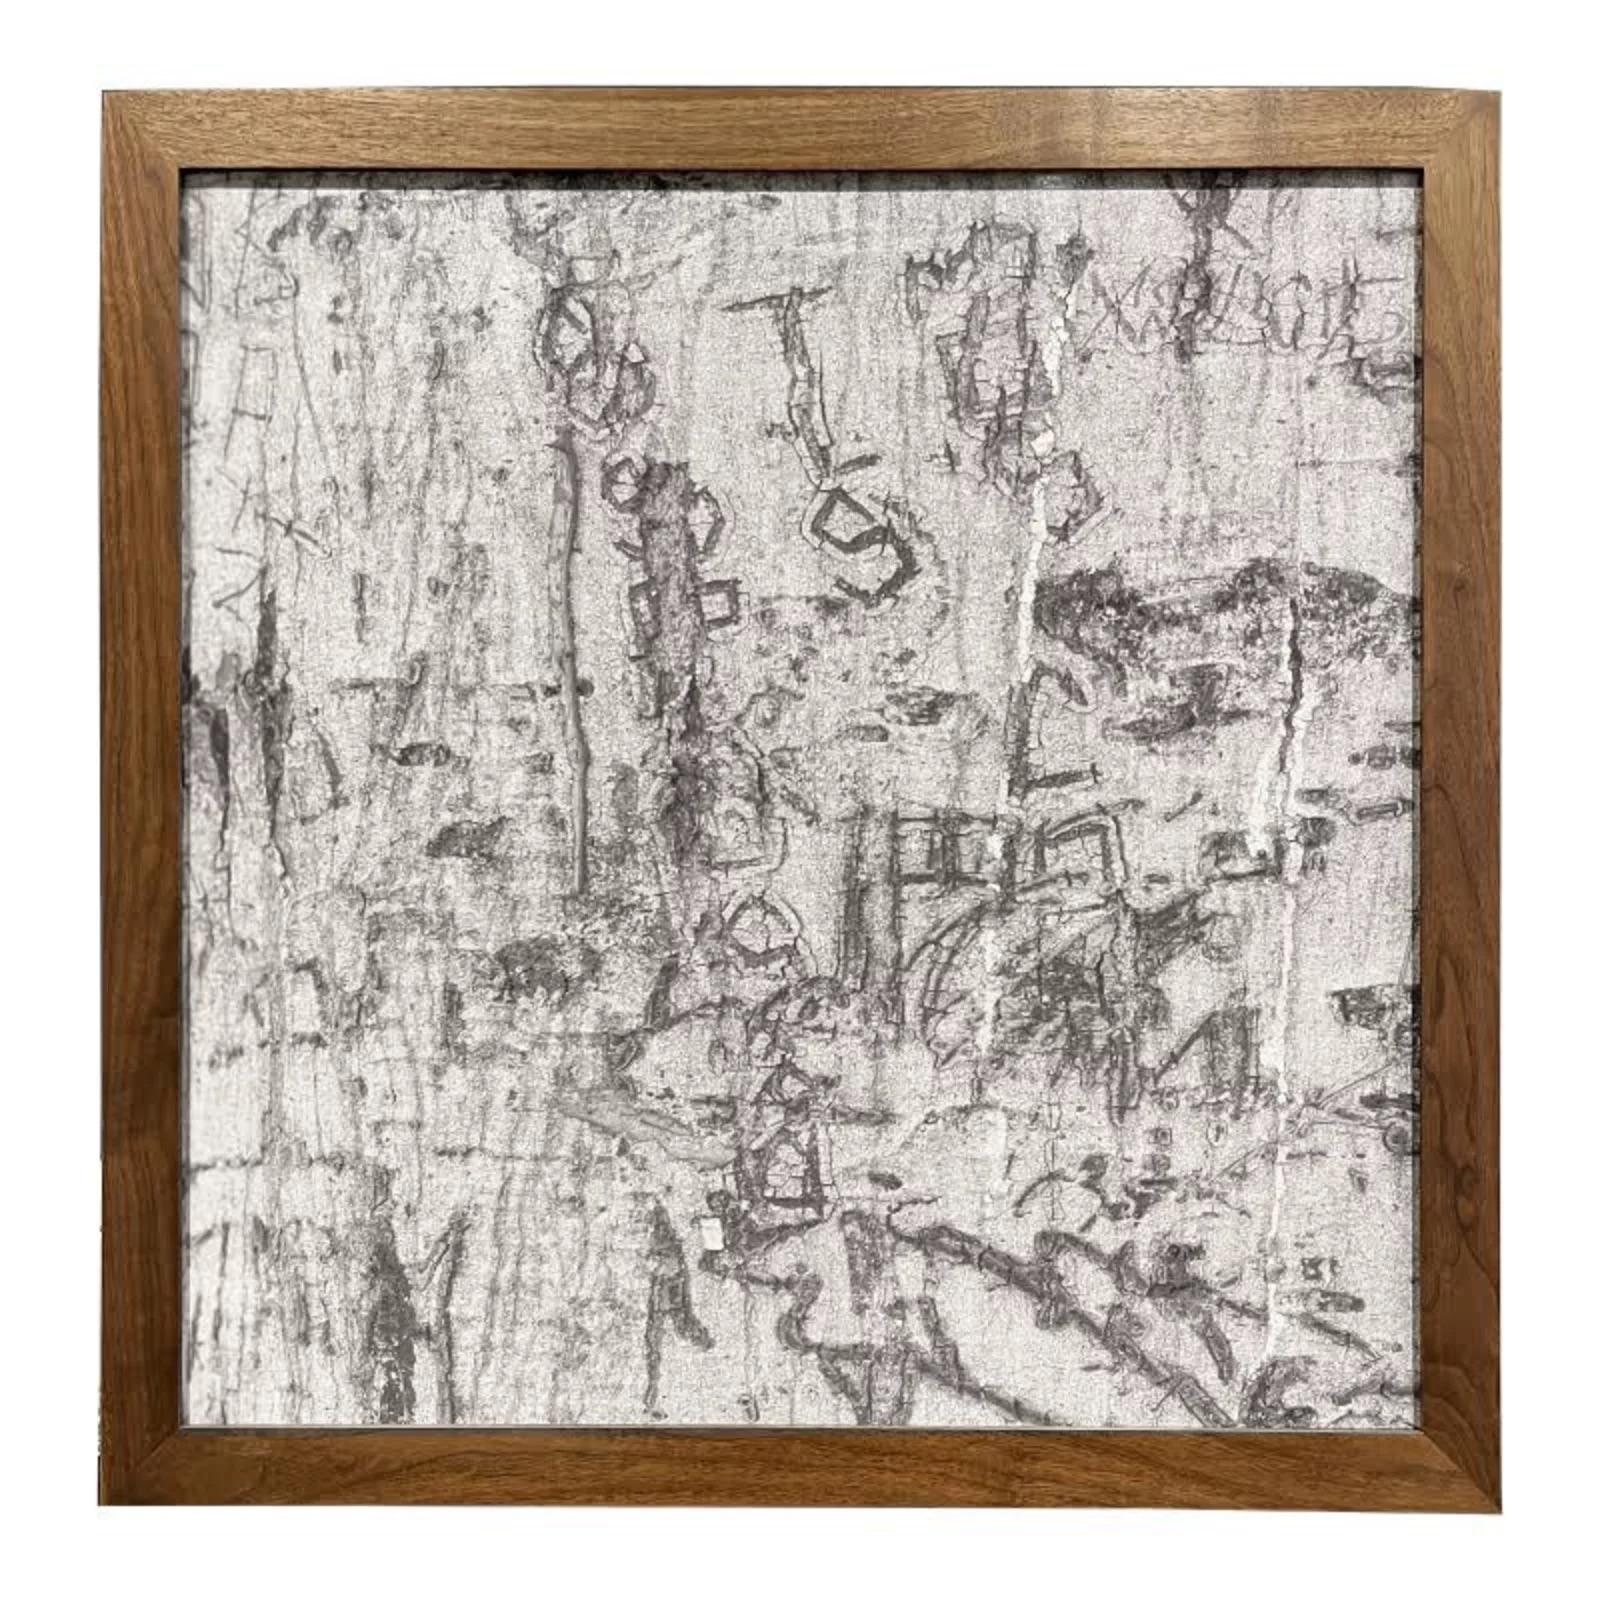 Carvings 1-5 by Sterling Ruby is one work in five parts of images of tree carvings.  

Sold as a set of five only, each work is 36 x 36 inches, framed by the artist in a deep mahogany finished wood.

Chromogenic print, Edition of